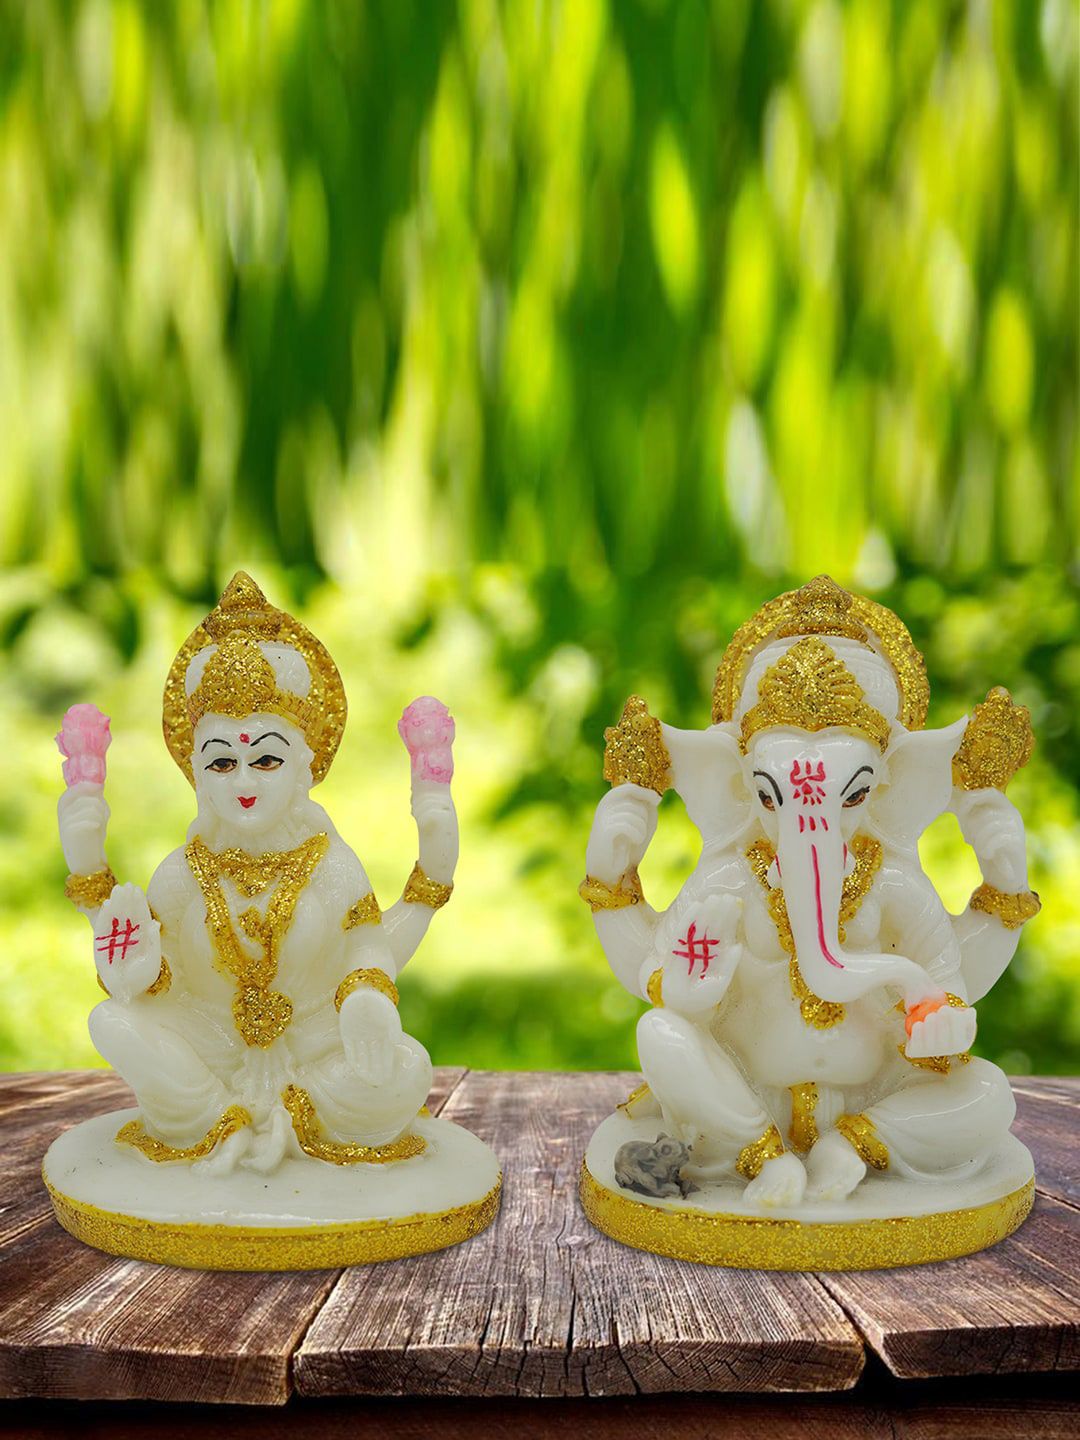 Gallery99 Set of 2 Gold & White Hand-Painted Lord Laxmi & Ganesha Showpiece Idol Price in India